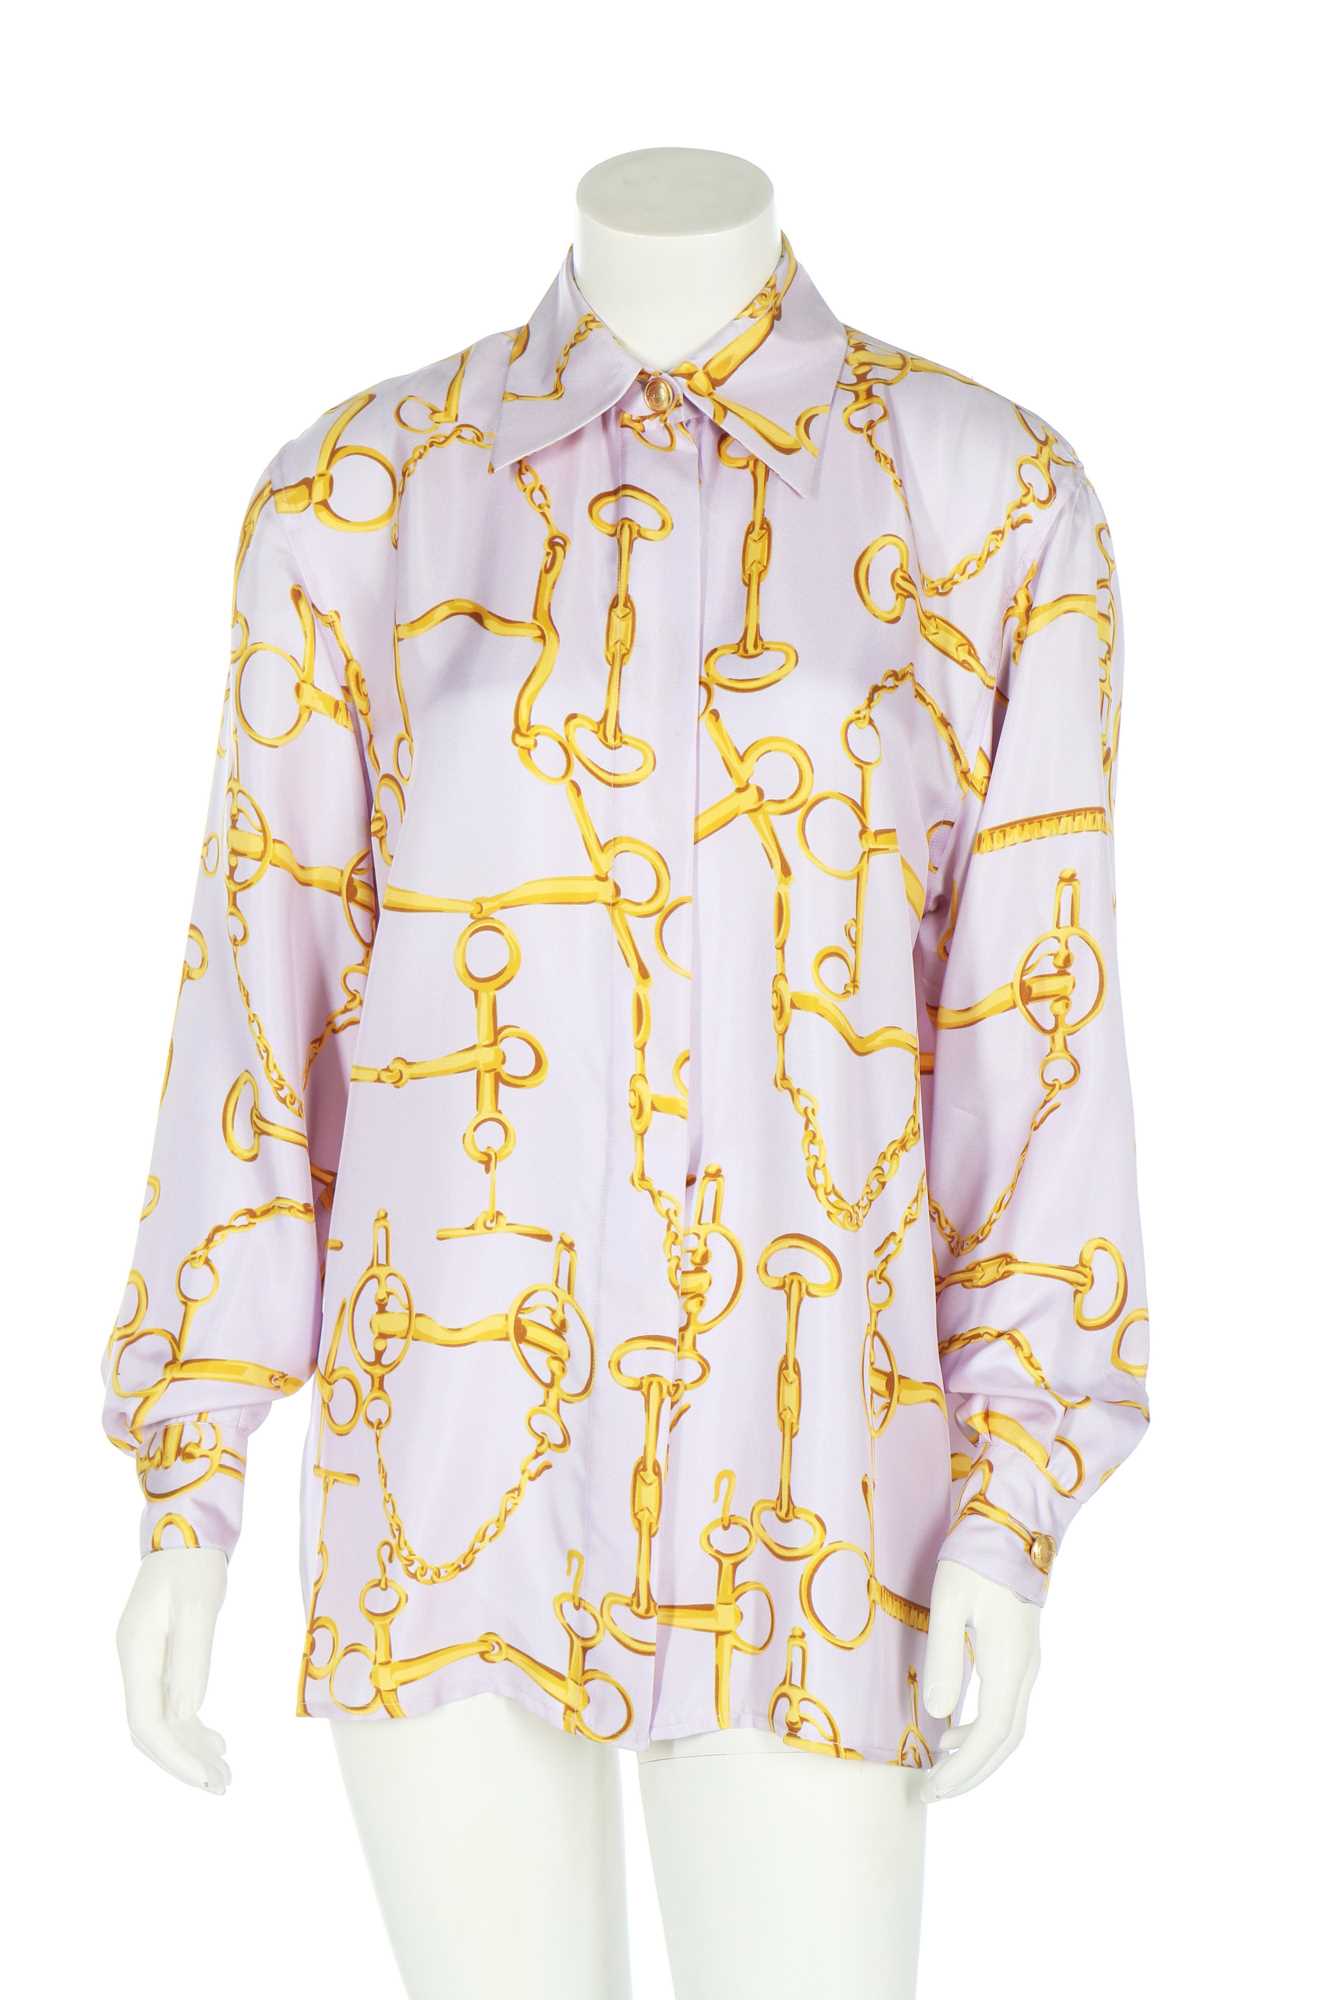 Lot 170 - A Gucci lilac silk shirt printed with